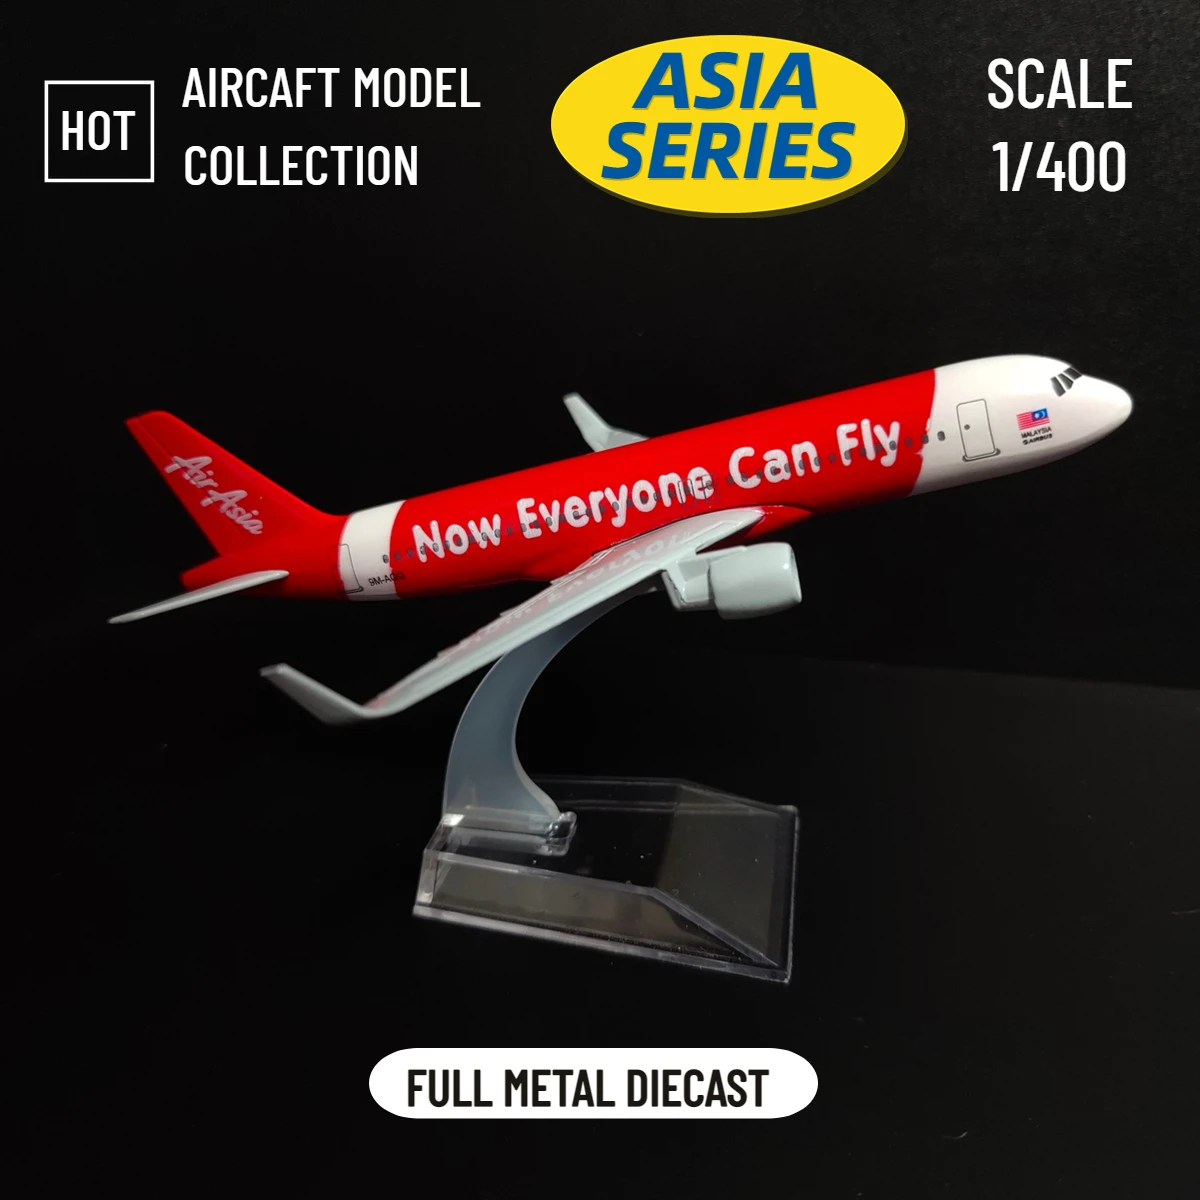 

Scale 1:400 Metal Planes Replica 15cm Air Asia Malaysia Airline Boeing Aircraft Model Aviation Miniature Xmas Gfit for Boy Girl